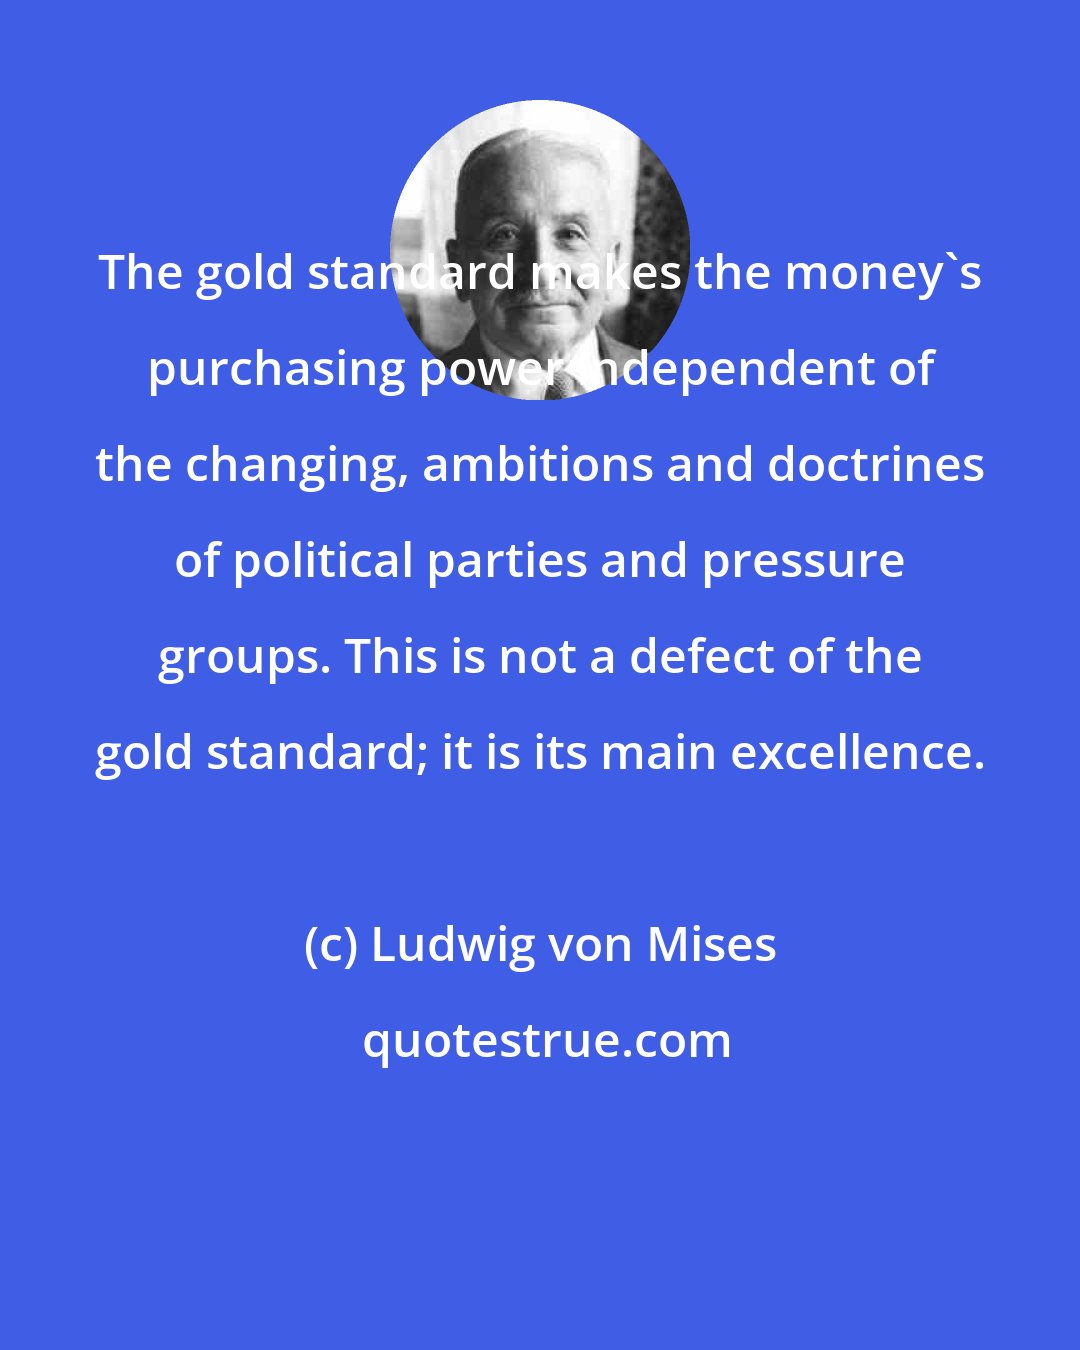 Ludwig von Mises: The gold standard makes the money's purchasing power independent of the changing, ambitions and doctrines of political parties and pressure groups. This is not a defect of the gold standard; it is its main excellence.